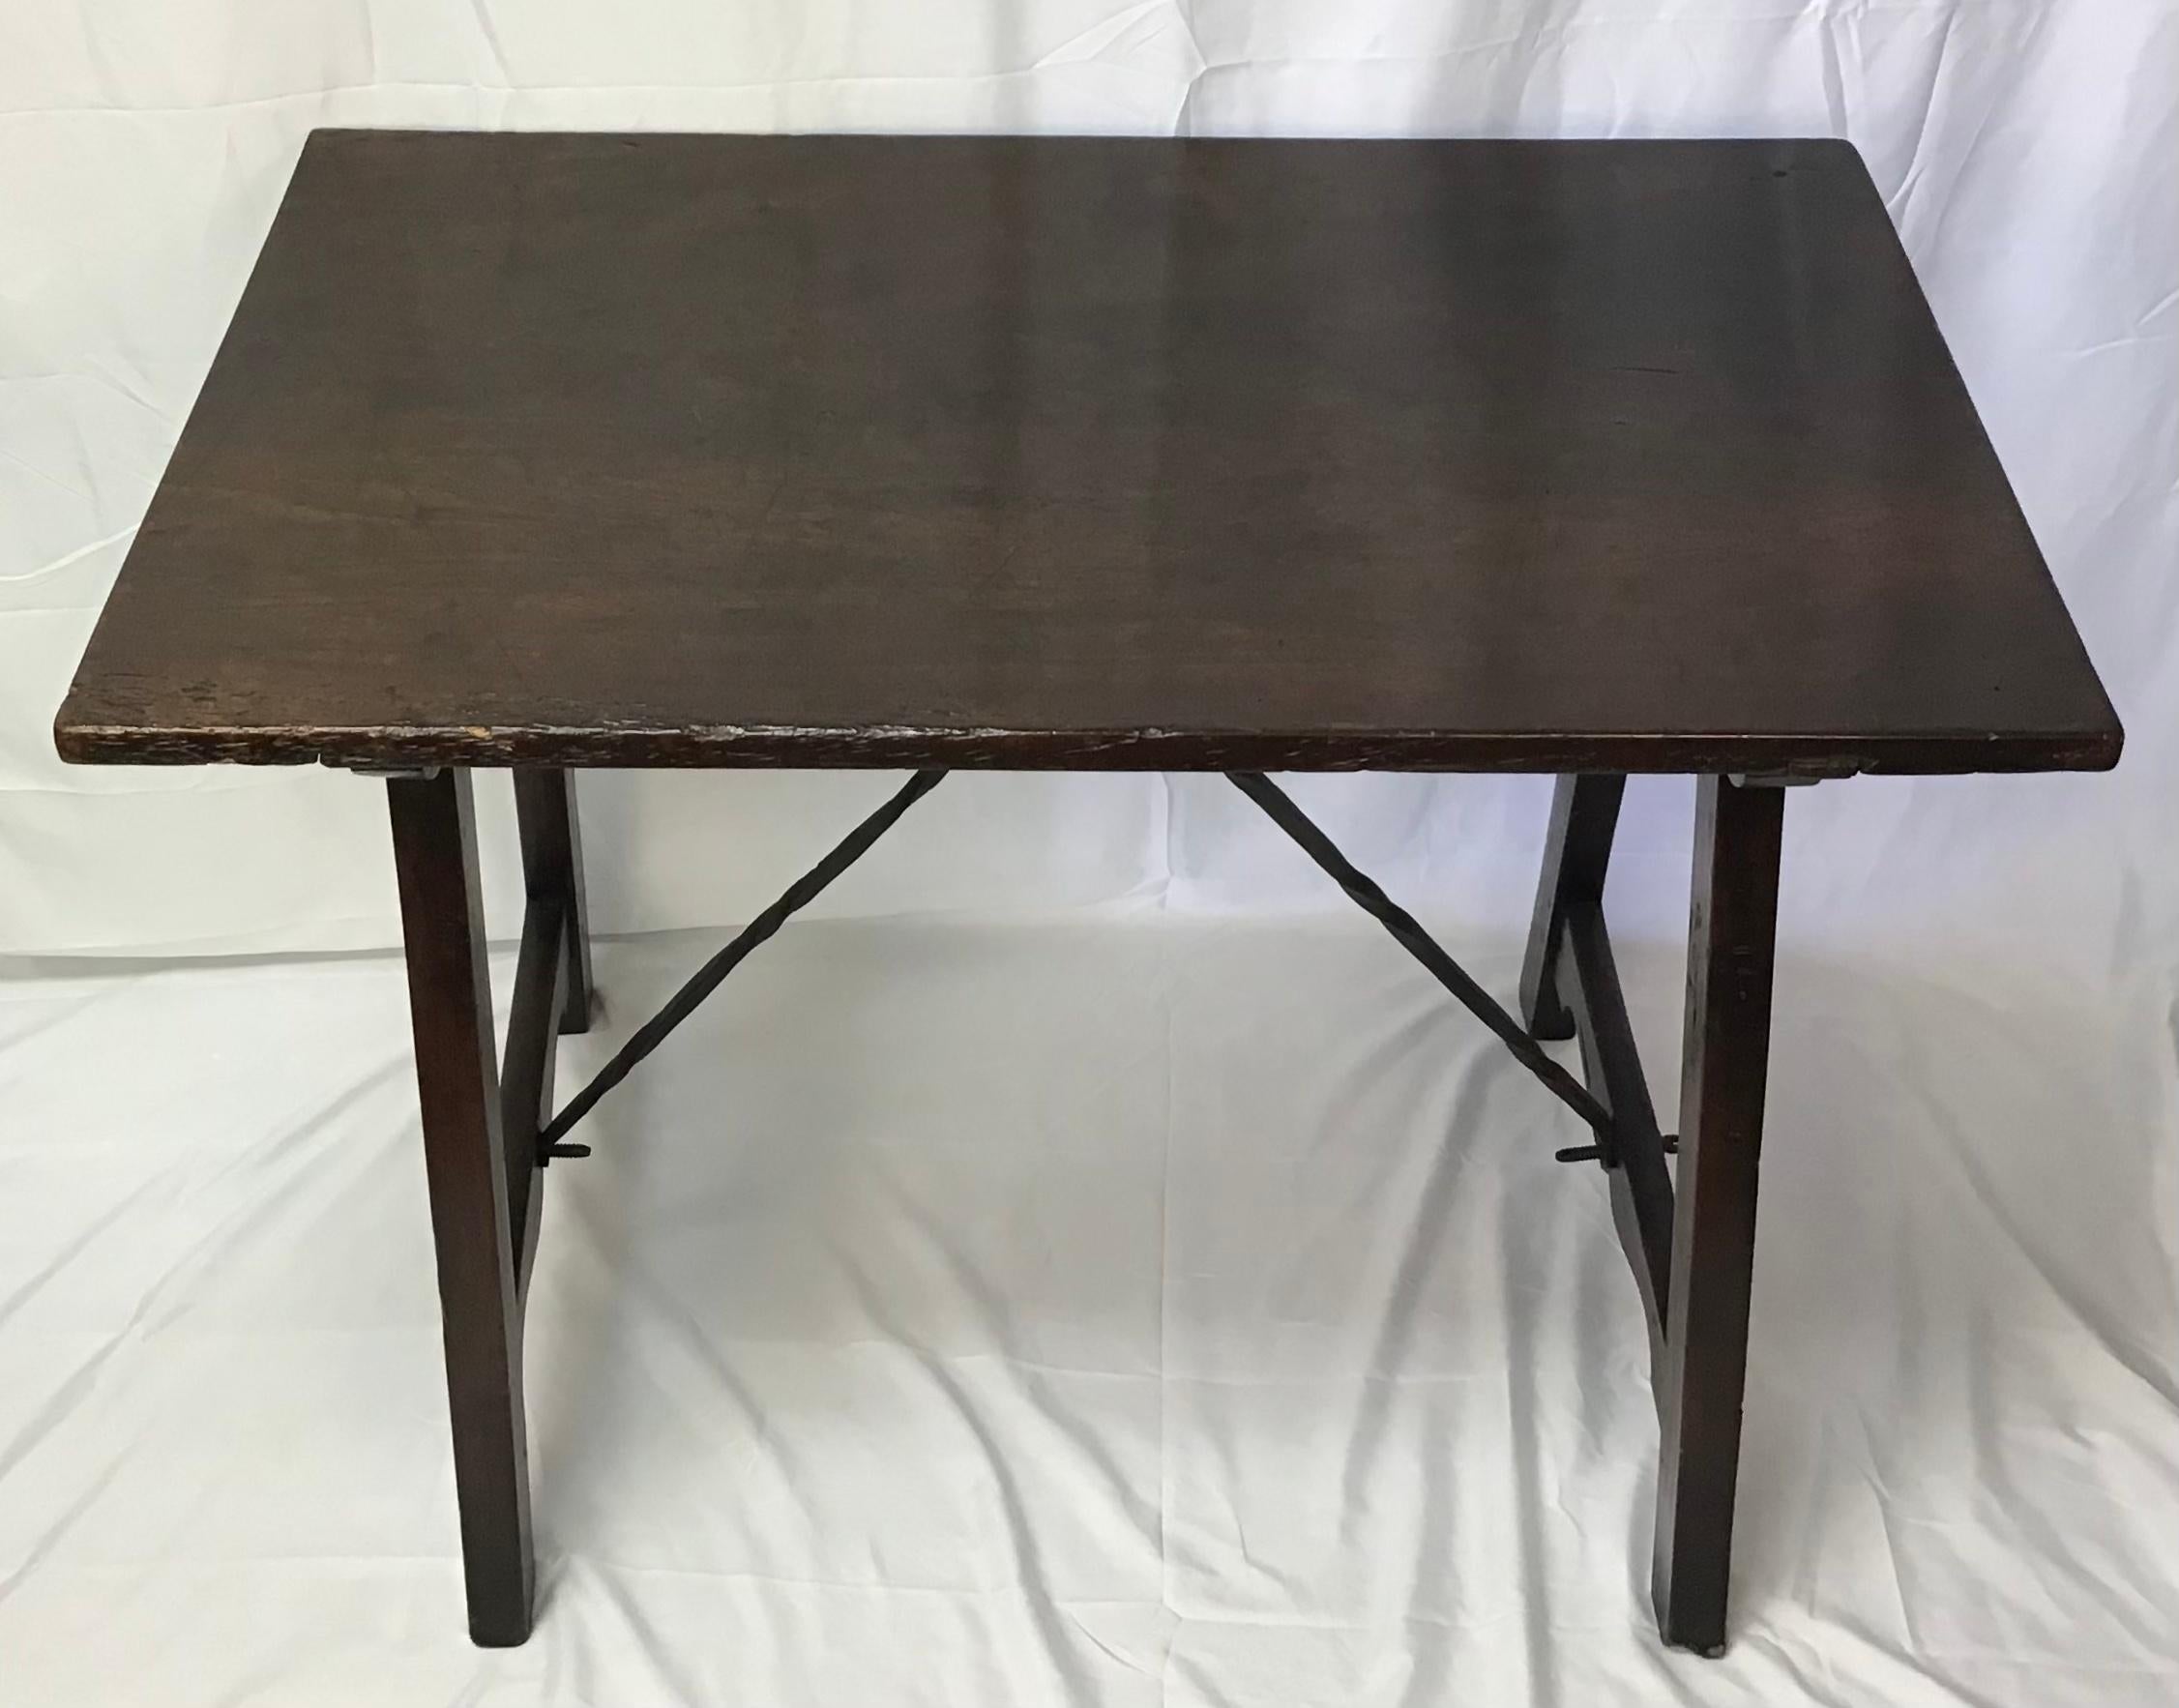 Italian, 17th century. Baroque walnut dining or tavern table having a shaped trestle base with iron supports. Perfect size to use as a writing table, sofa or center table.